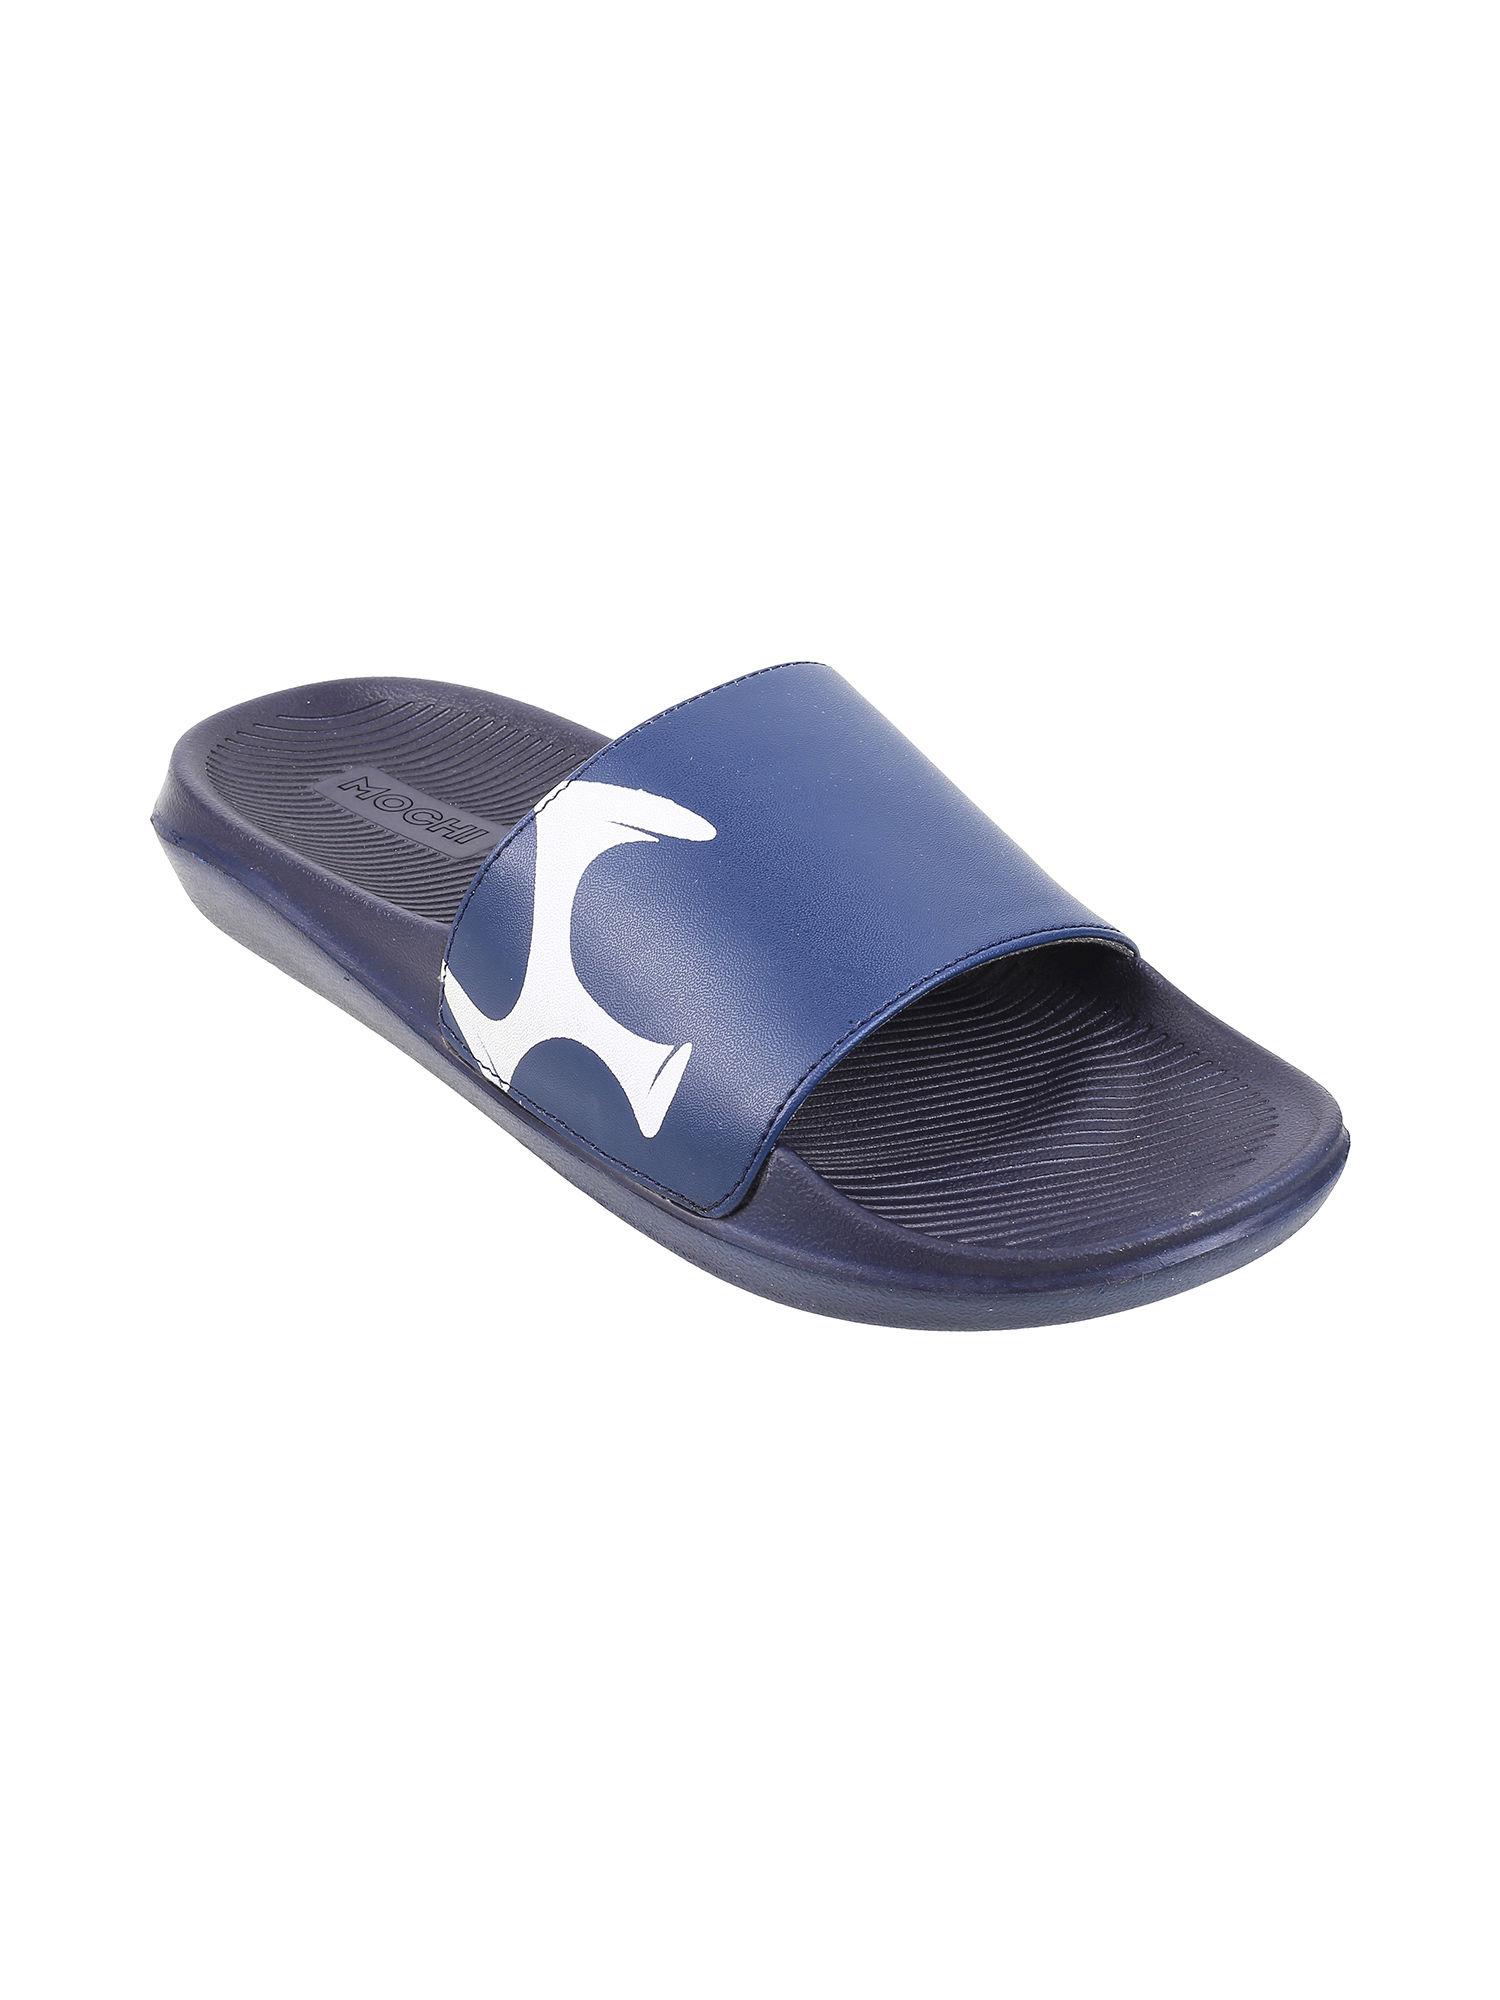 comfortable-mens-synthetic-blue-sliders